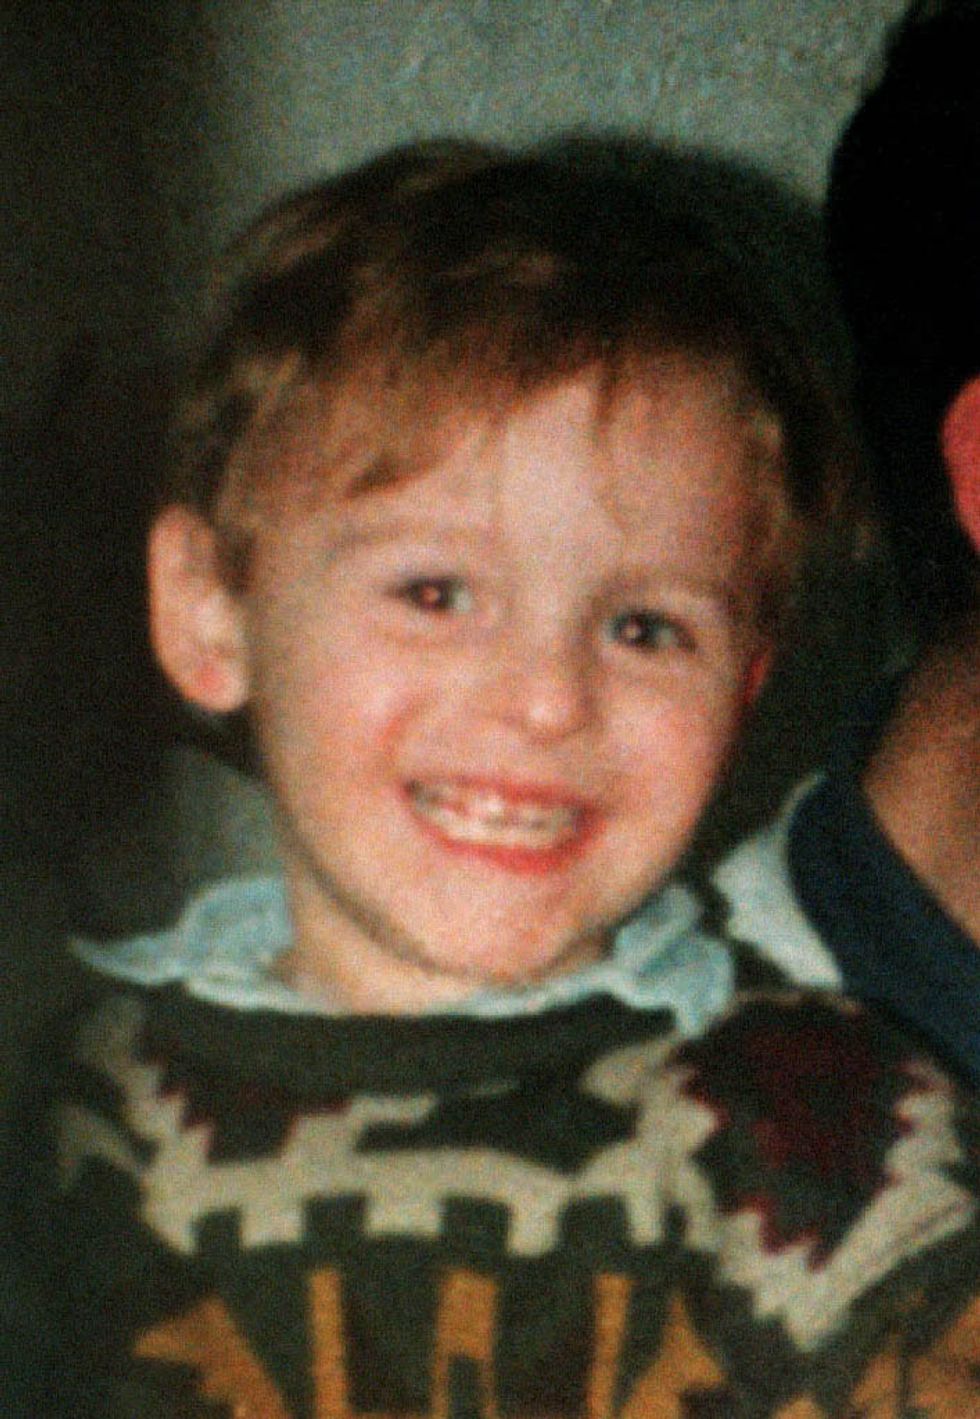 James Bulger the 2 year old boy who went missing in the Bootle area of Liverpool.